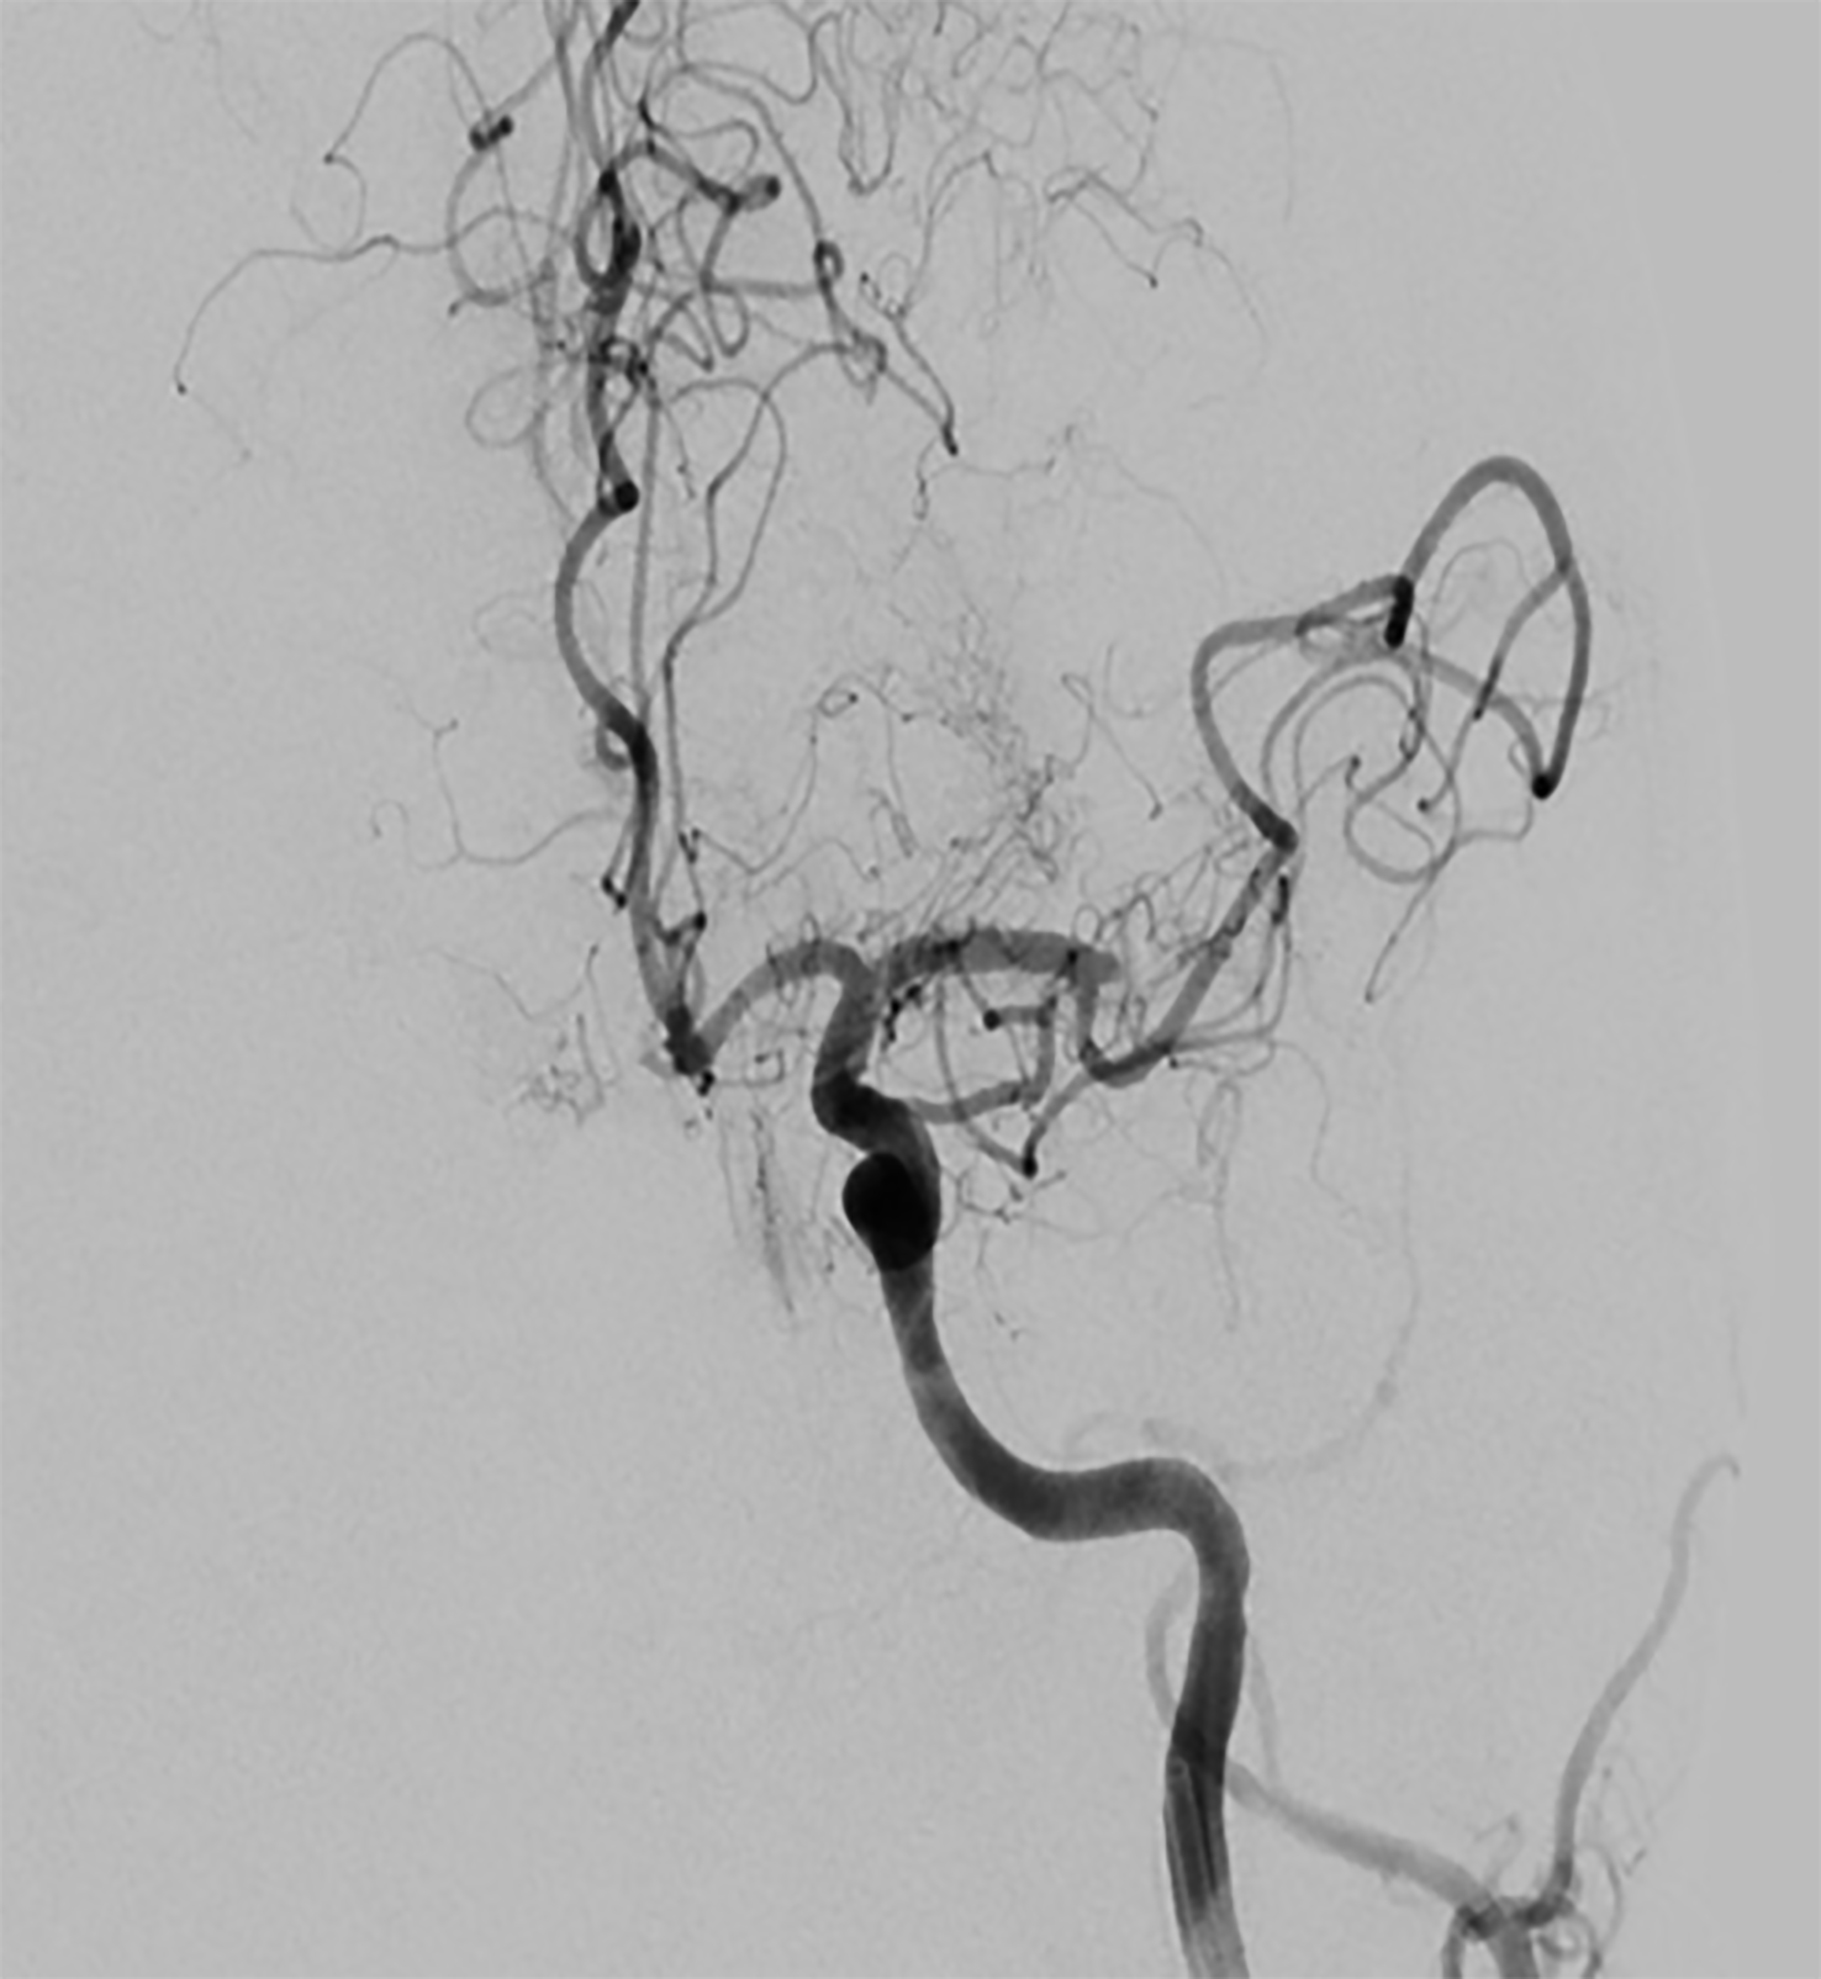 Occlusion of left middle cerebral artery